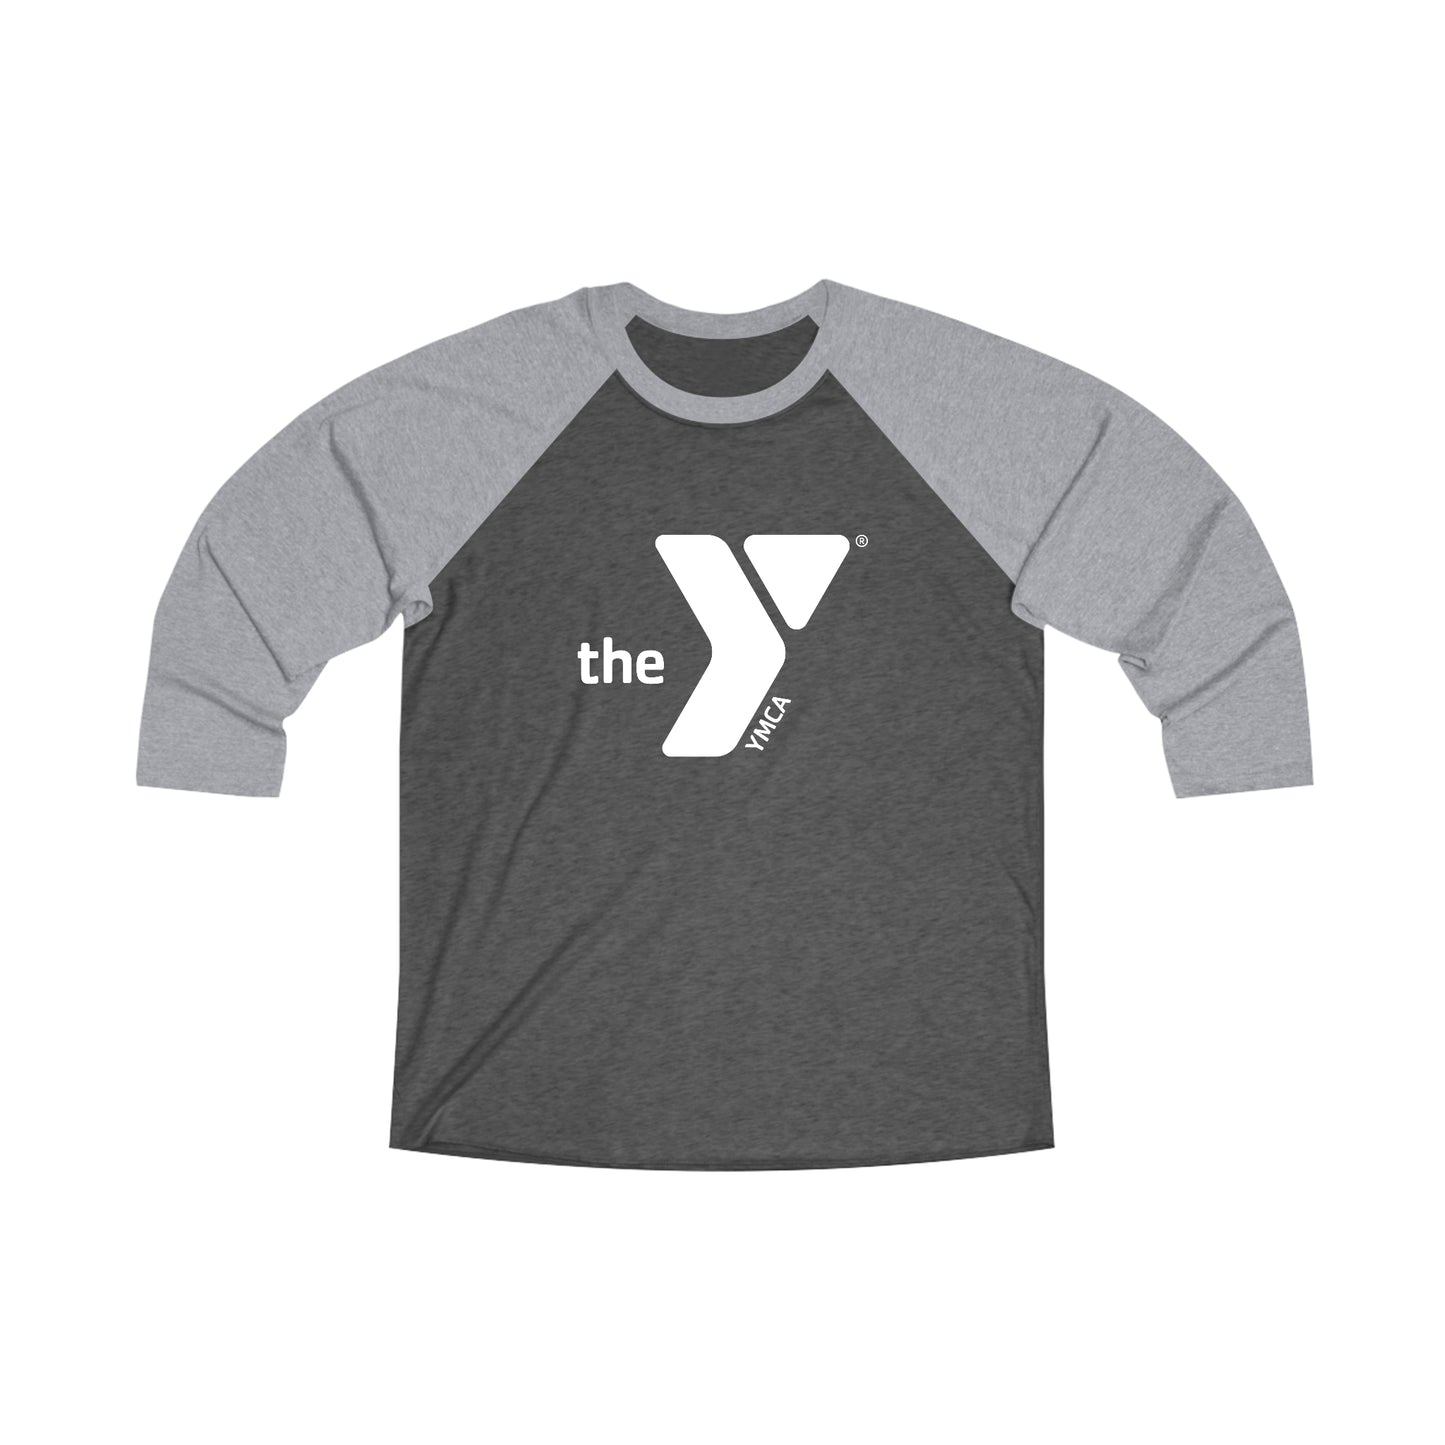 There's the Y Unisex Tri-Blend 3\4 Raglan Tee